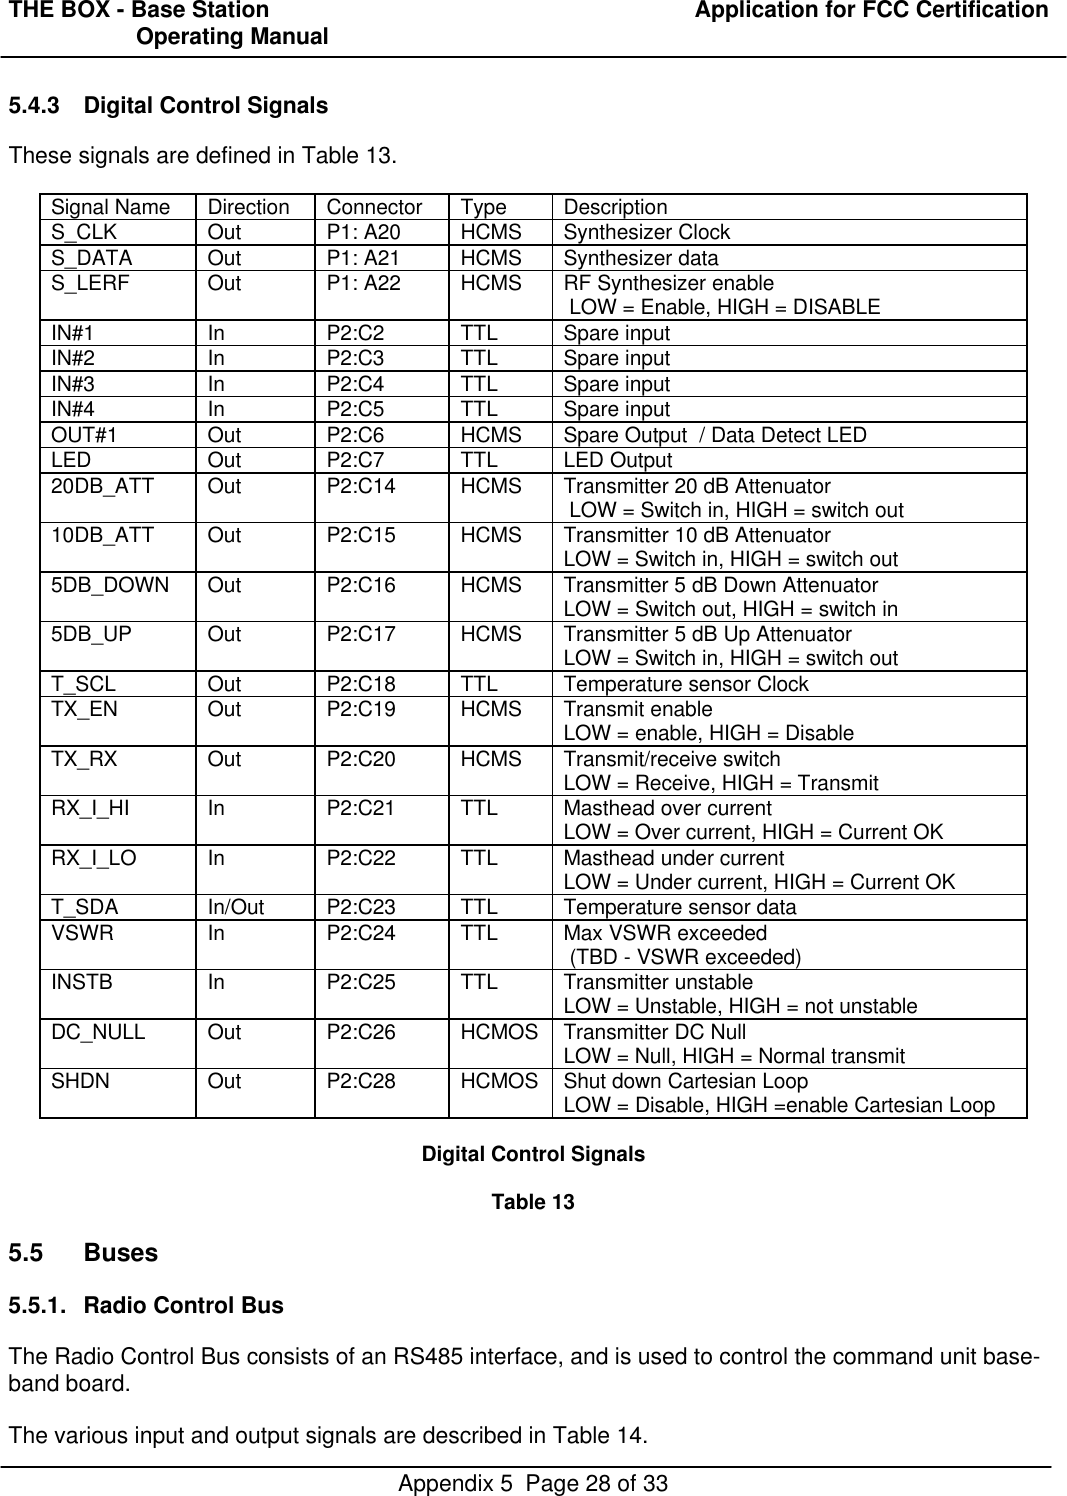 THE BOX - Base Station  Application for FCC Certification                    Operating ManualAppendix 5  Page 28 of 335.4.3 Digital Control SignalsThese signals are defined in Table 13.Signal Name Direction Connector Type DescriptionS_CLK Out P1: A20 HCMS Synthesizer ClockS_DATA Out P1: A21 HCMS Synthesizer dataS_LERF Out P1: A22 HCMS RF Synthesizer enable LOW = Enable, HIGH = DISABLEIN#1 In P2:C2 TTL Spare inputIN#2 In P2:C3 TTL Spare inputIN#3 In P2:C4 TTL Spare inputIN#4 In P2:C5 TTL Spare inputOUT#1 Out P2:C6 HCMS Spare Output  / Data Detect LEDLED Out P2:C7 TTL LED Output20DB_ATT Out P2:C14 HCMS Transmitter 20 dB Attenuator LOW = Switch in, HIGH = switch out10DB_ATT Out P2:C15 HCMS Transmitter 10 dB AttenuatorLOW = Switch in, HIGH = switch out5DB_DOWN Out P2:C16 HCMS Transmitter 5 dB Down AttenuatorLOW = Switch out, HIGH = switch in5DB_UP Out P2:C17 HCMS Transmitter 5 dB Up AttenuatorLOW = Switch in, HIGH = switch outT_SCL Out P2:C18 TTL Temperature sensor ClockTX_EN Out P2:C19 HCMS Transmit enableLOW = enable, HIGH = DisableTX_RX Out P2:C20 HCMS Transmit/receive switchLOW = Receive, HIGH = TransmitRX_I_HI In P2:C21 TTL Masthead over currentLOW = Over current, HIGH = Current OKRX_I_LO In P2:C22 TTL Masthead under currentLOW = Under current, HIGH = Current OKT_SDA In/Out P2:C23 TTL Temperature sensor dataVSWR In P2:C24 TTL Max VSWR exceeded (TBD - VSWR exceeded)INSTB In P2:C25 TTL Transmitter unstableLOW = Unstable, HIGH = not unstableDC_NULL Out P2:C26 HCMOS Transmitter DC NullLOW = Null, HIGH = Normal transmitSHDN Out P2:C28 HCMOS Shut down Cartesian LoopLOW = Disable, HIGH =enable Cartesian LoopDigital Control SignalsTable 135.5 Buses5.5.1. Radio Control BusThe Radio Control Bus consists of an RS485 interface, and is used to control the command unit base-band board.The various input and output signals are described in Table 14.